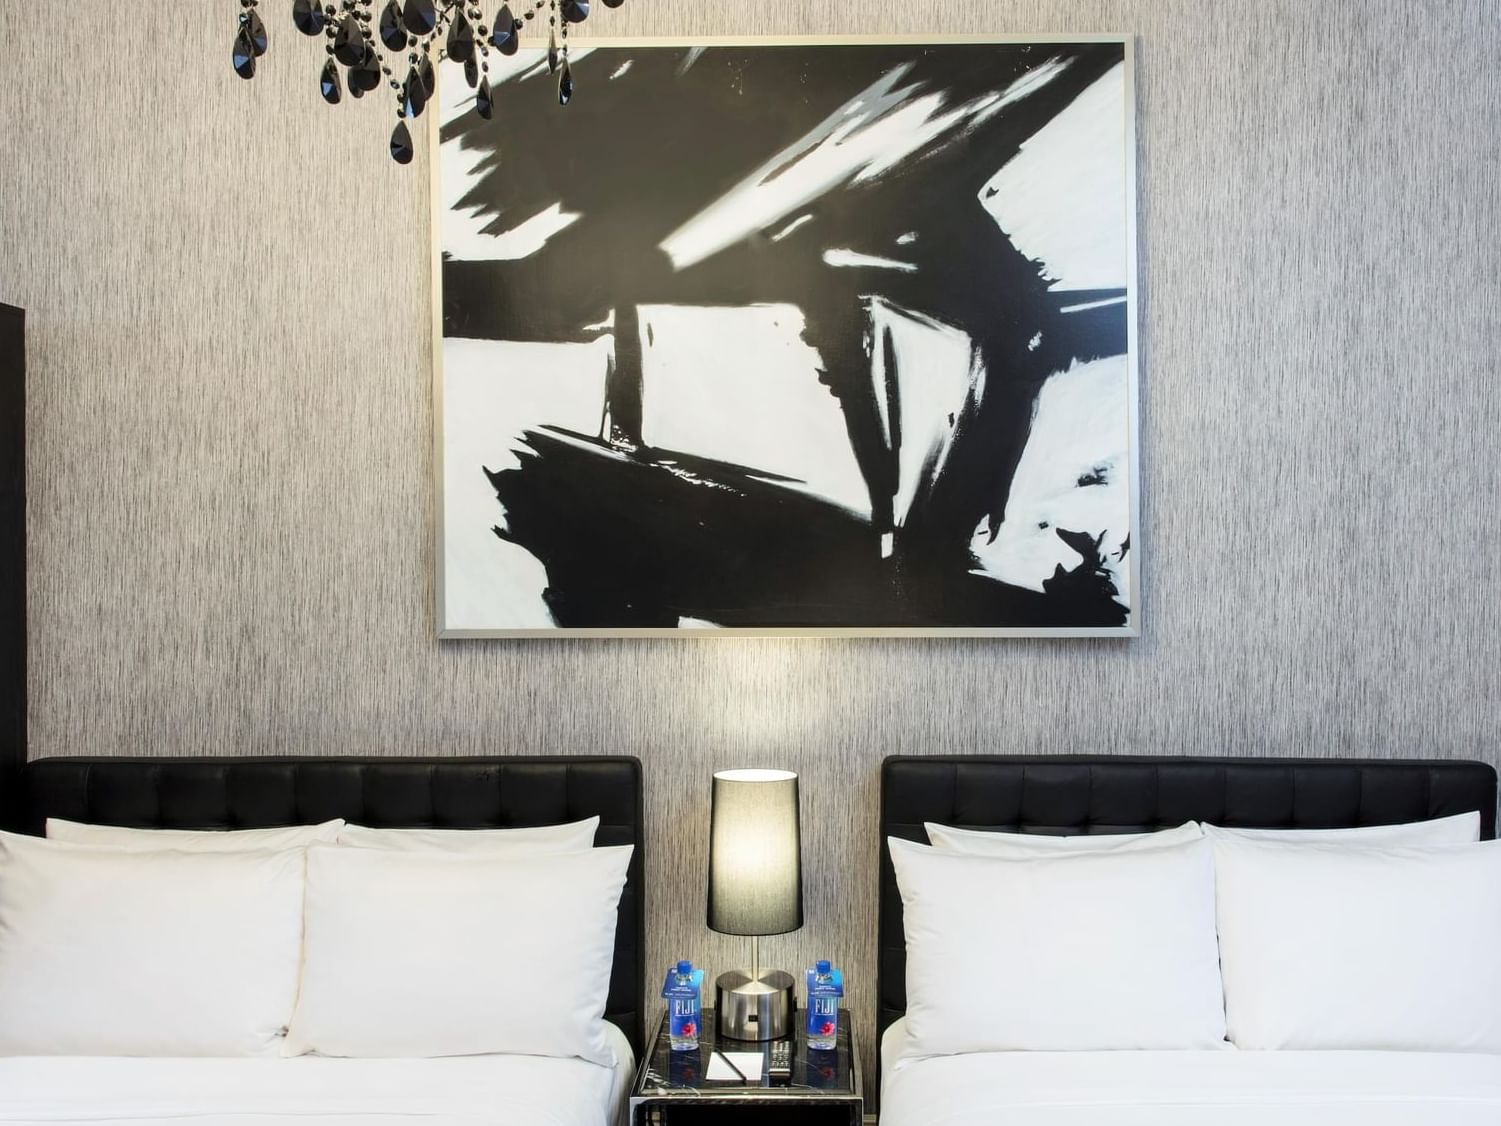 Two large white beds inside a hotel room with abstract art on the walls